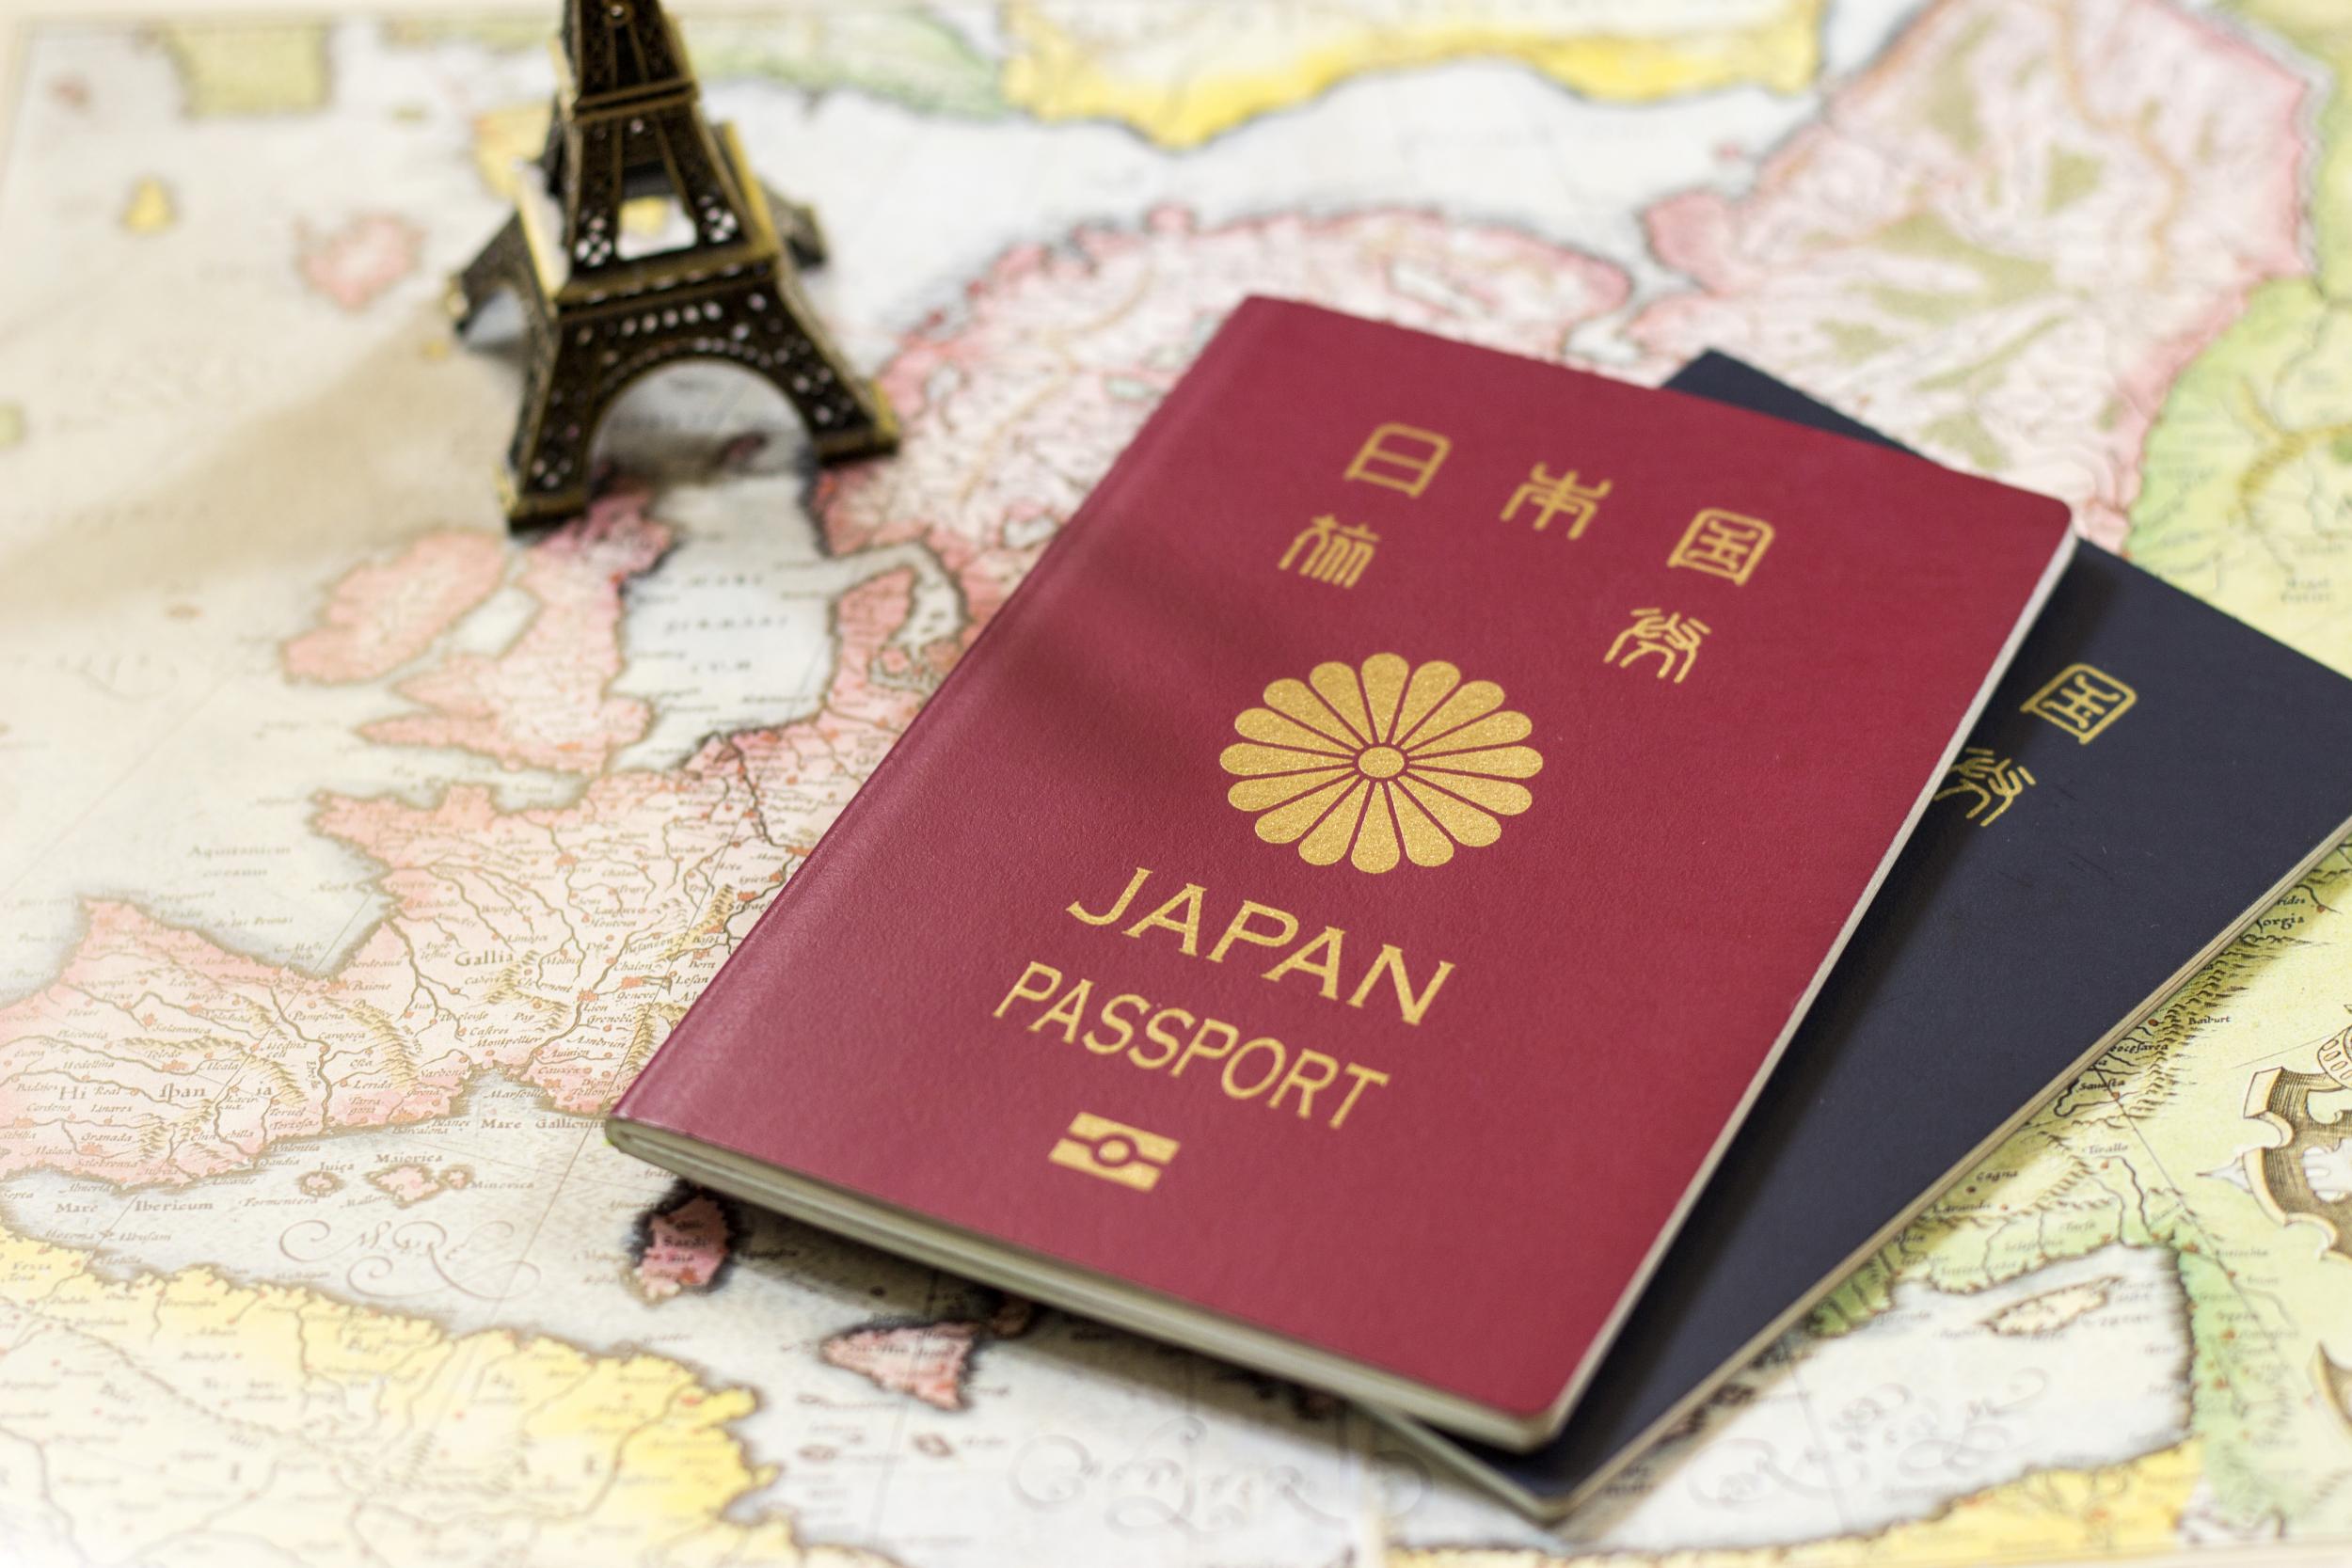 Vietnam Resumed 15-day Visa Exemption Policy for Japanese from March 15, 2022